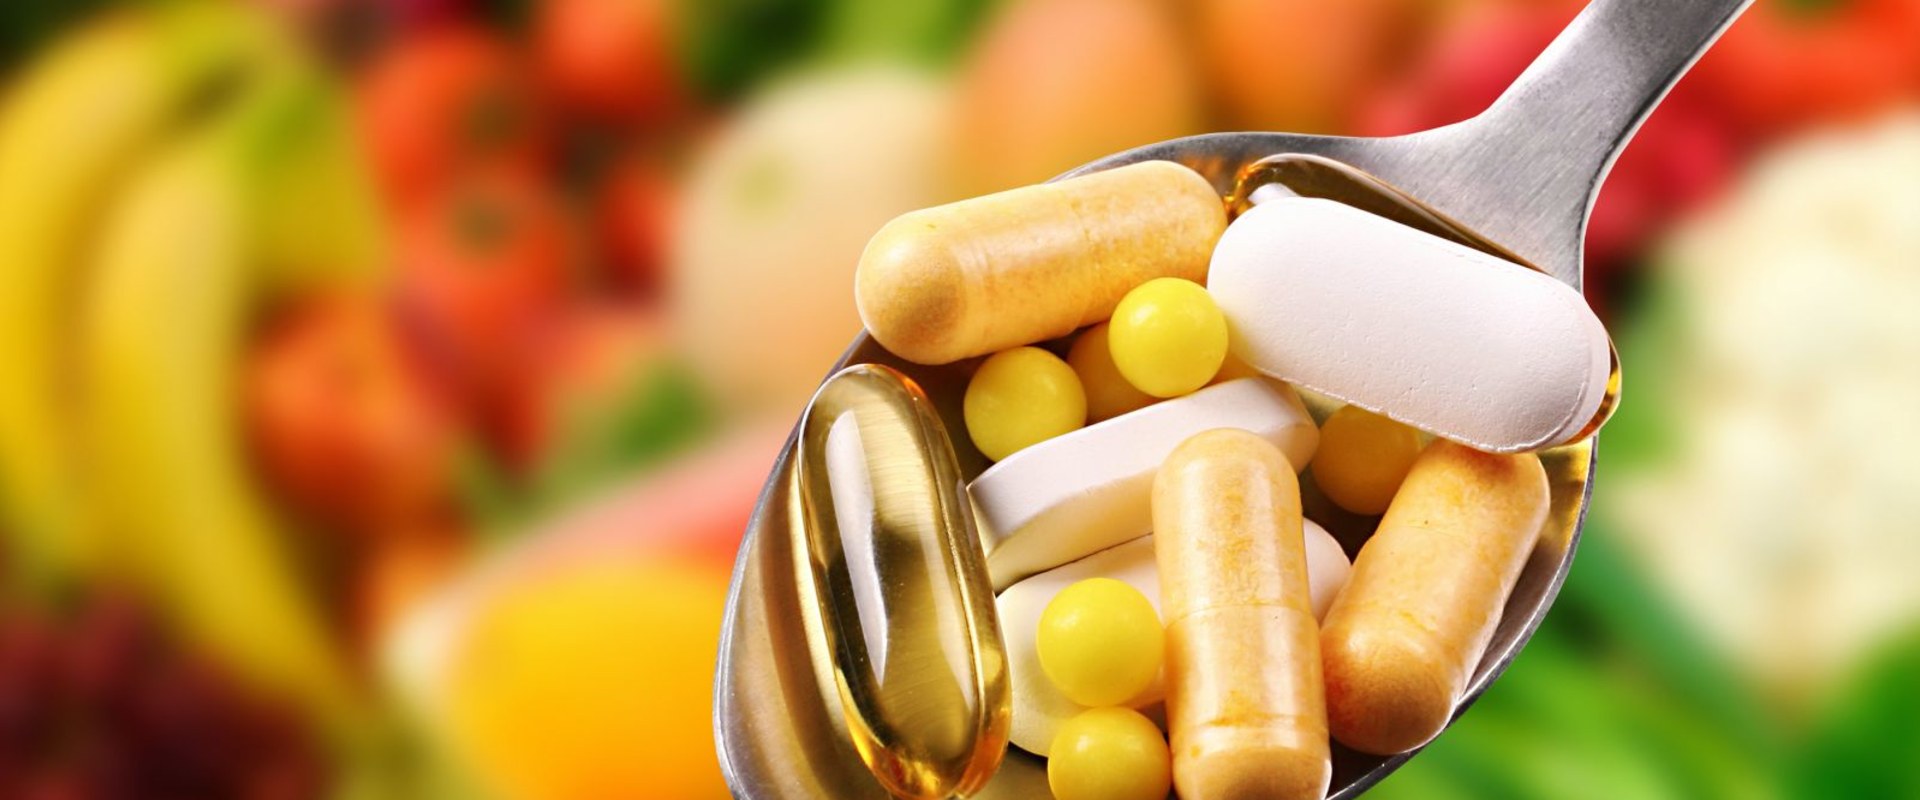 Are Dietary Supplements Safe? Pros and Cons of Taking Health Supplements